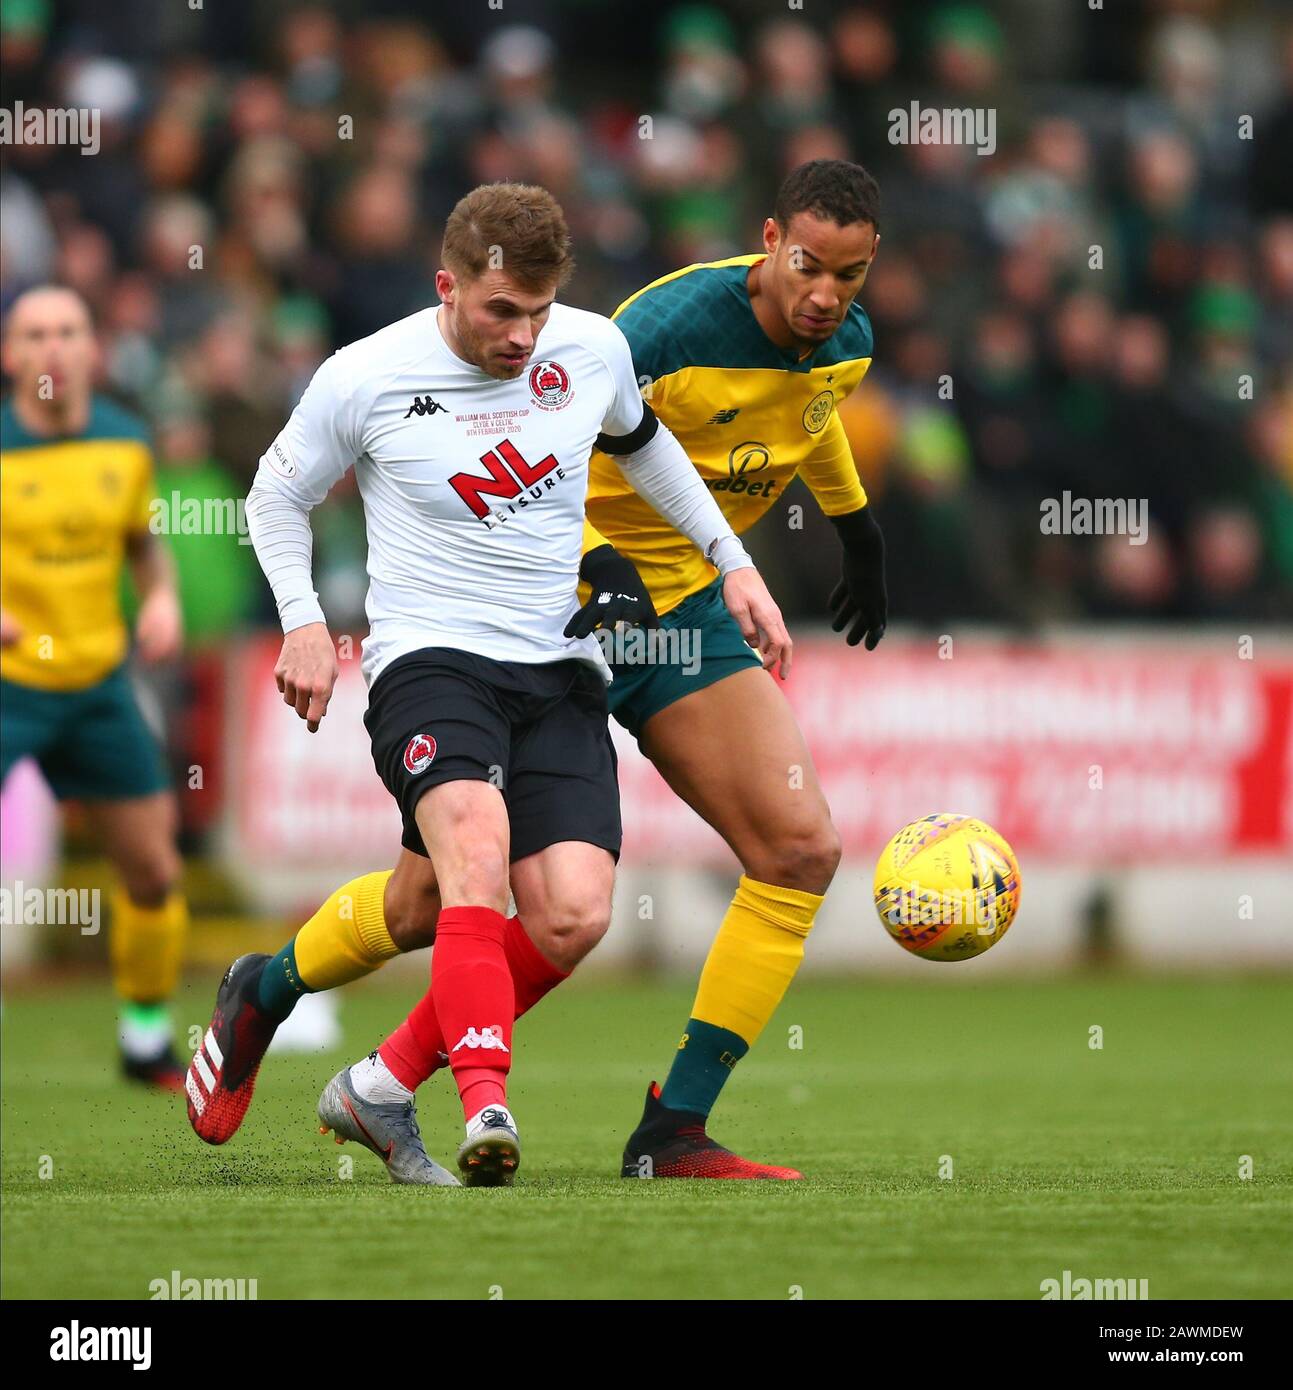 9th February 2020; Broadwood Stadium, Cumbernauld, North Lanarkshire, Scotland; Scottish Cup Football, Clyde versus Celtic; David Goodwillie of Clyde clears from Christopher Jullien of Celtic Stock Photo